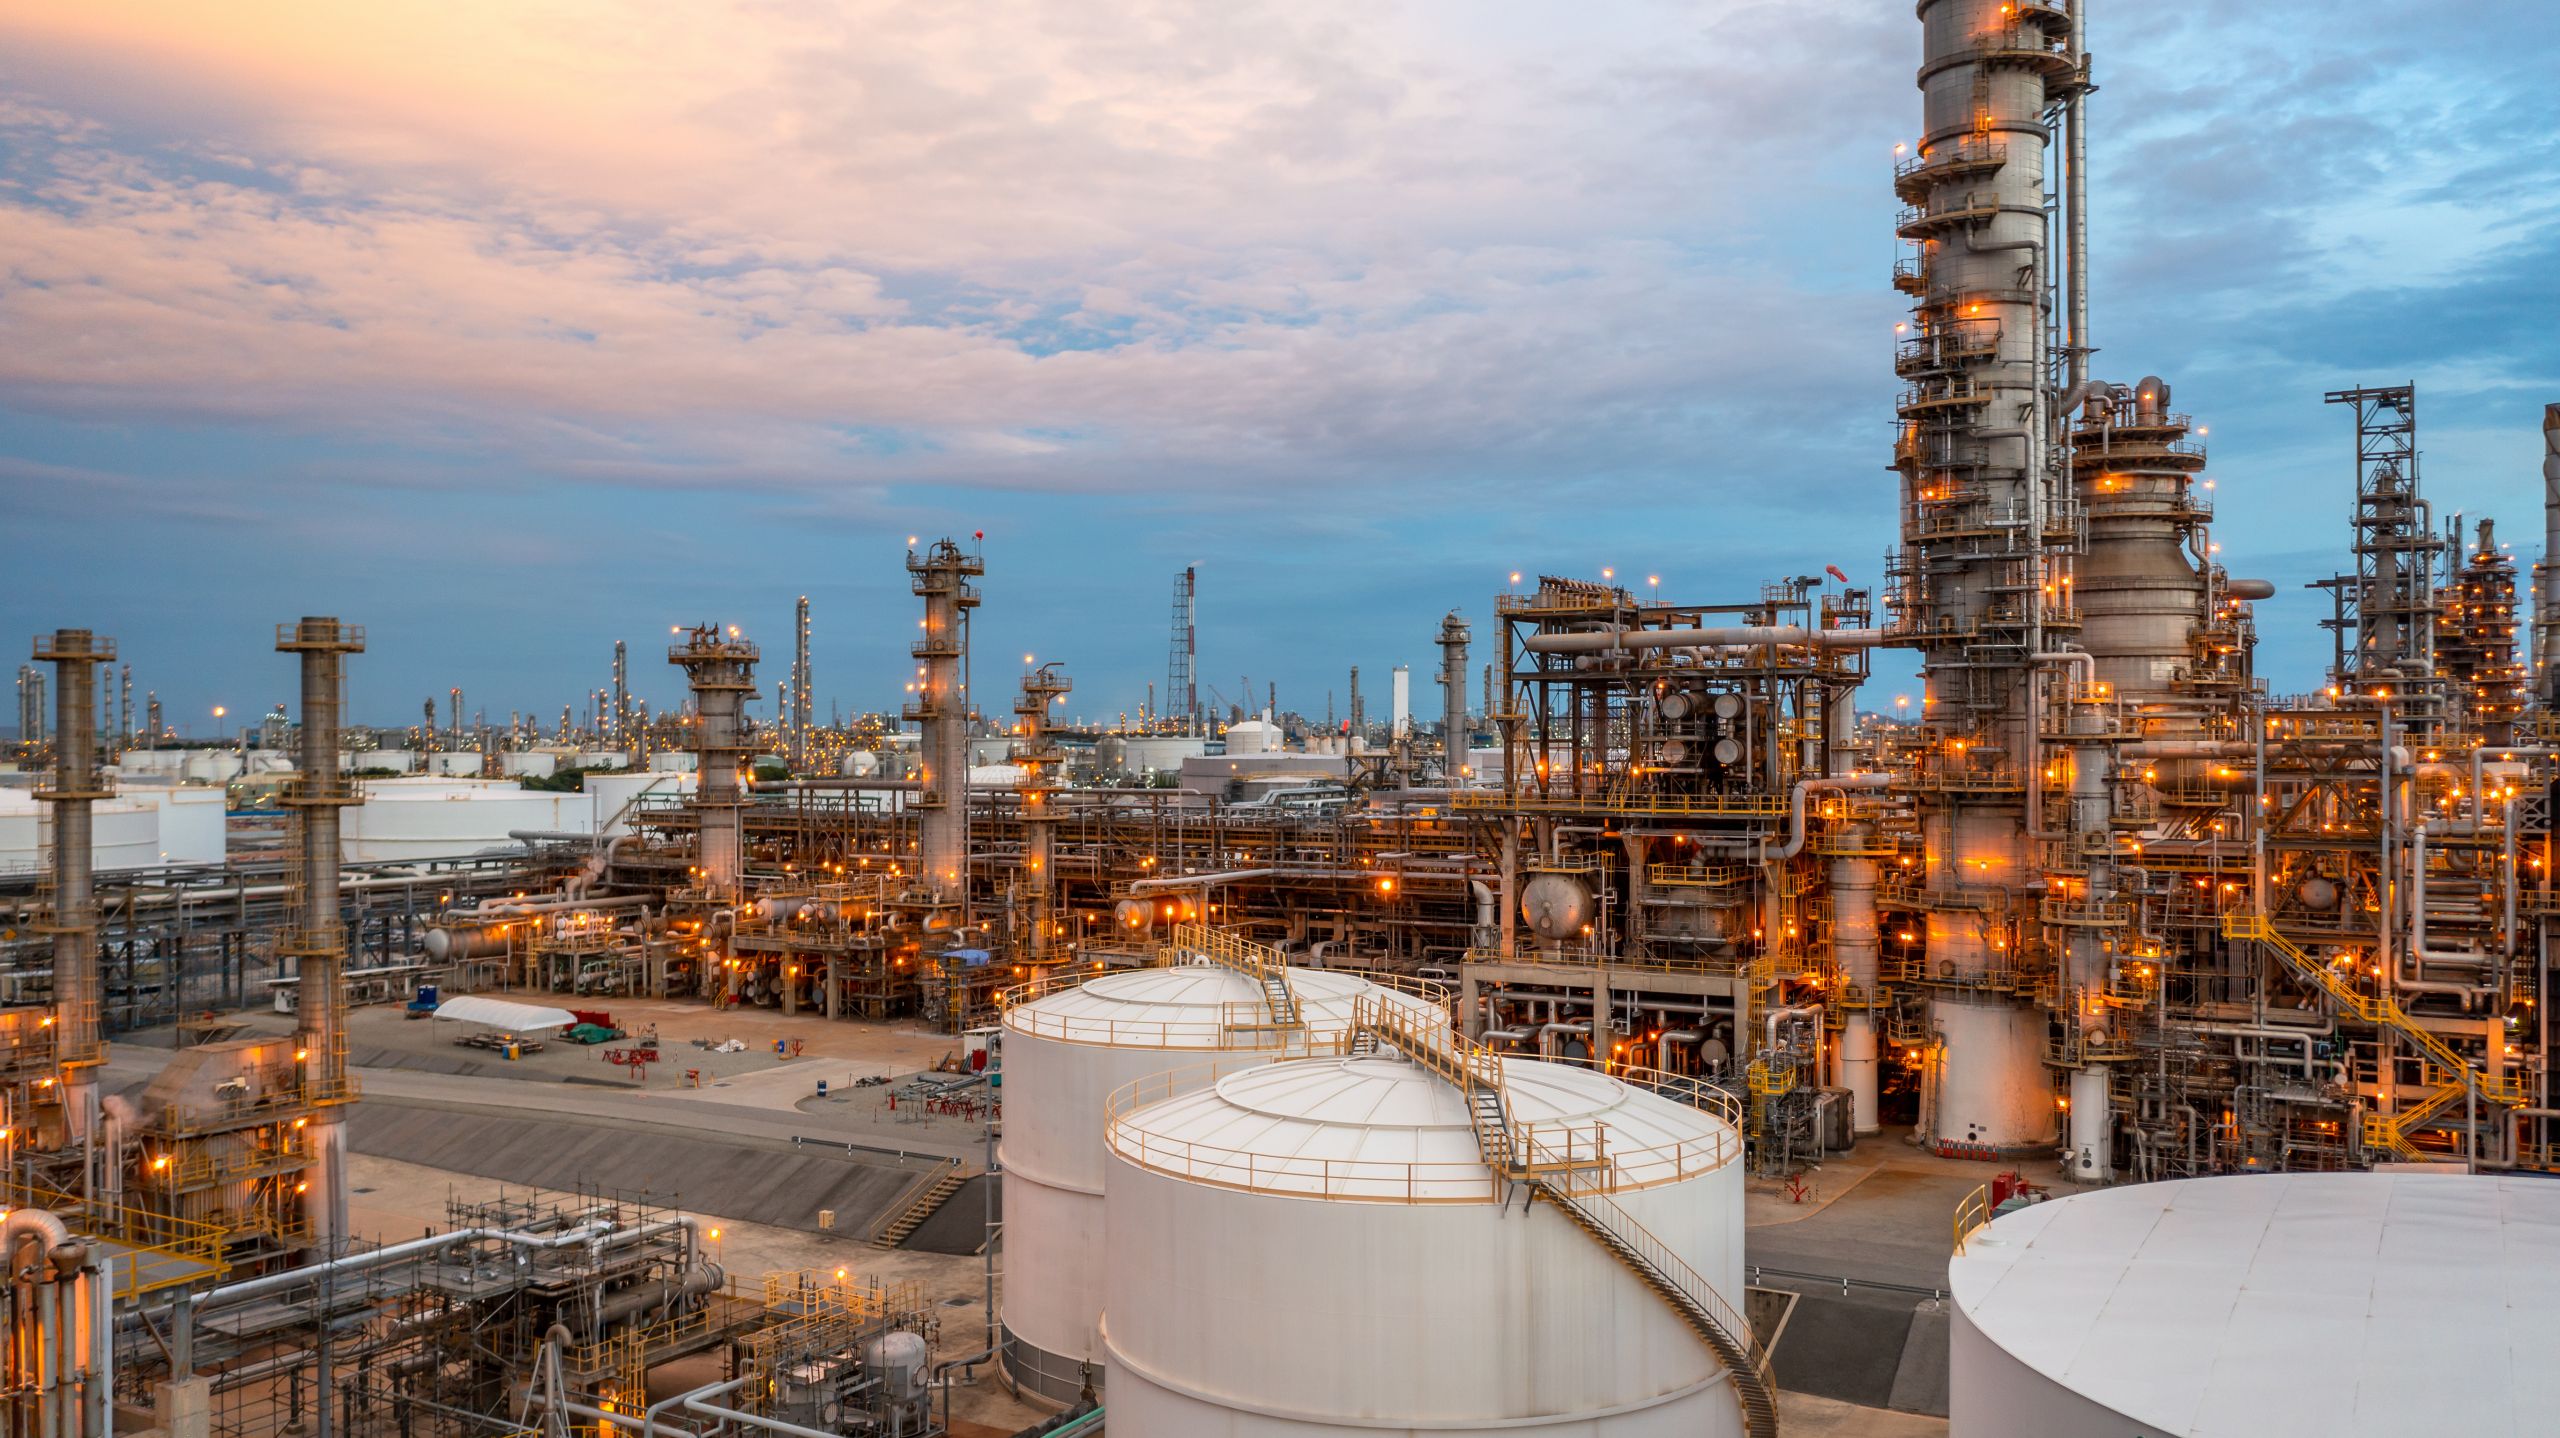 oil-and-gas-refinery-plant-form-industry-